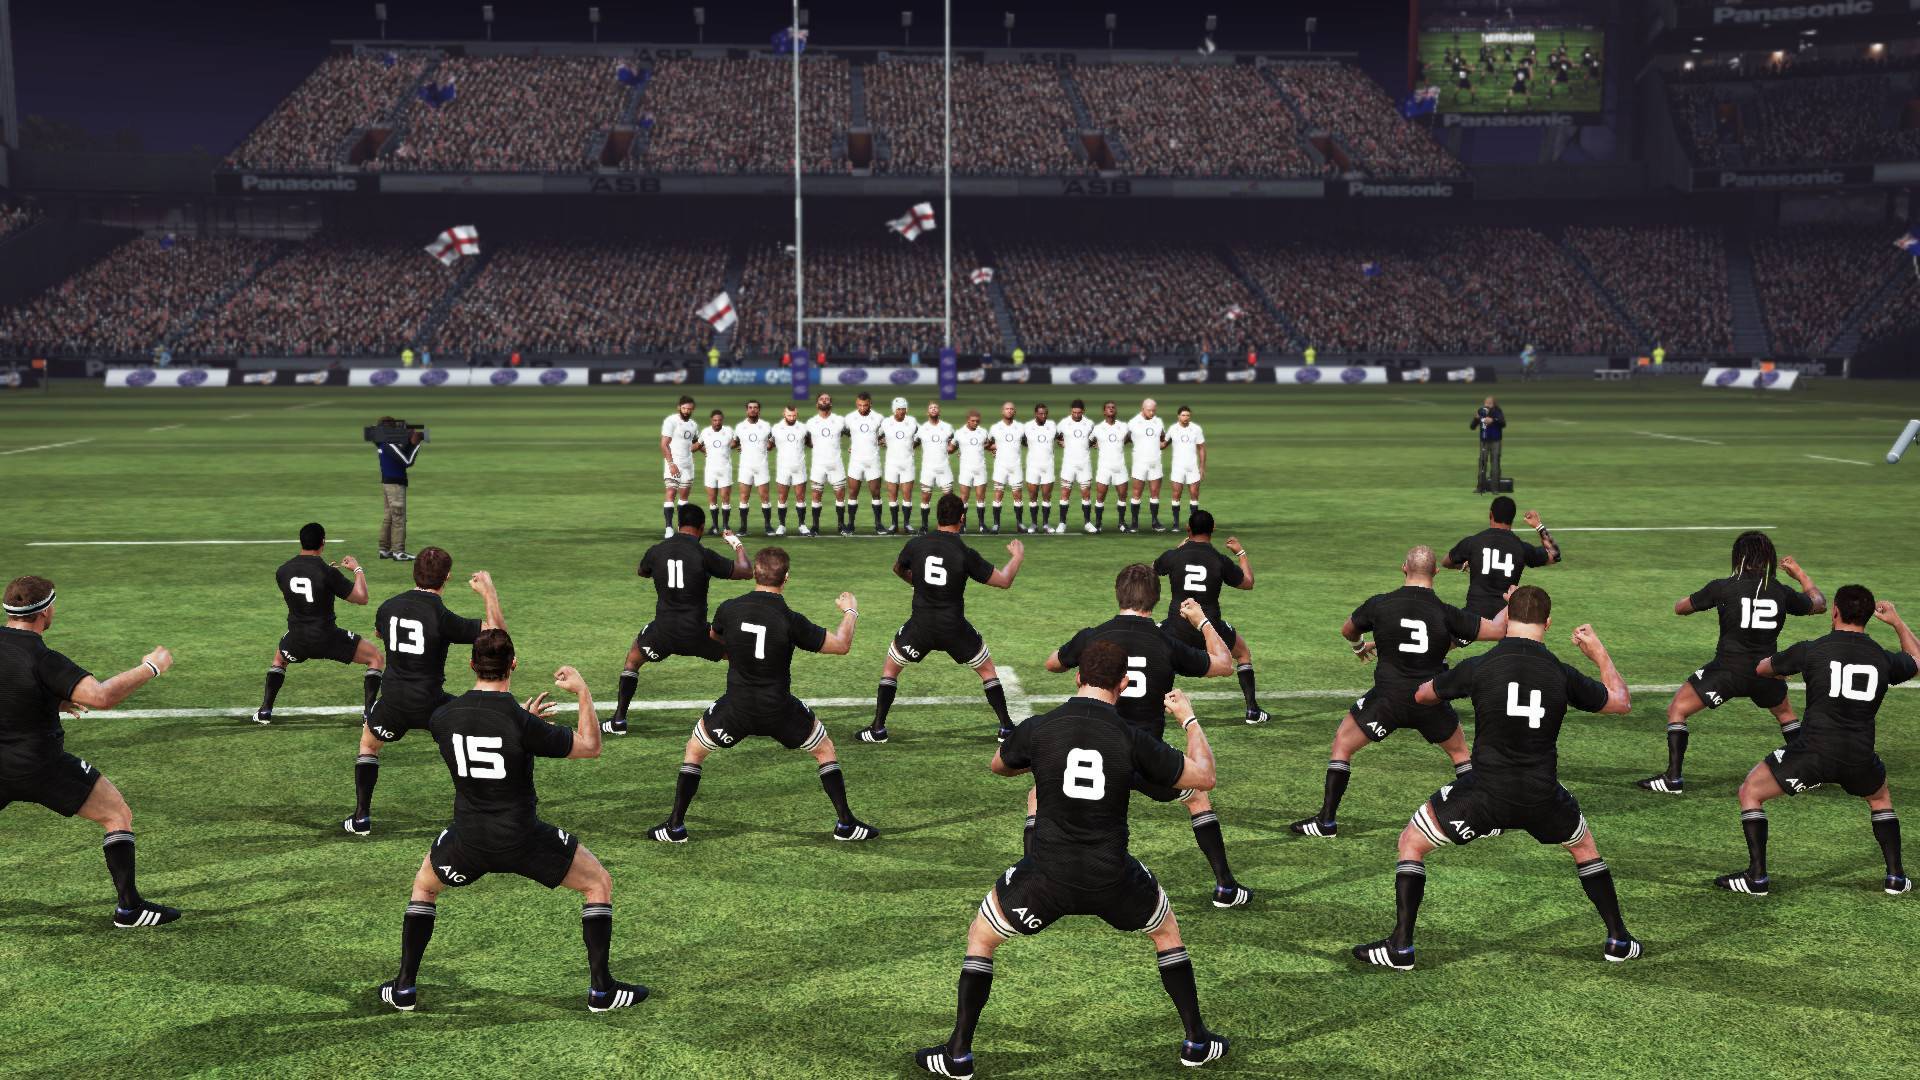 rugby challenge 3 xbox one